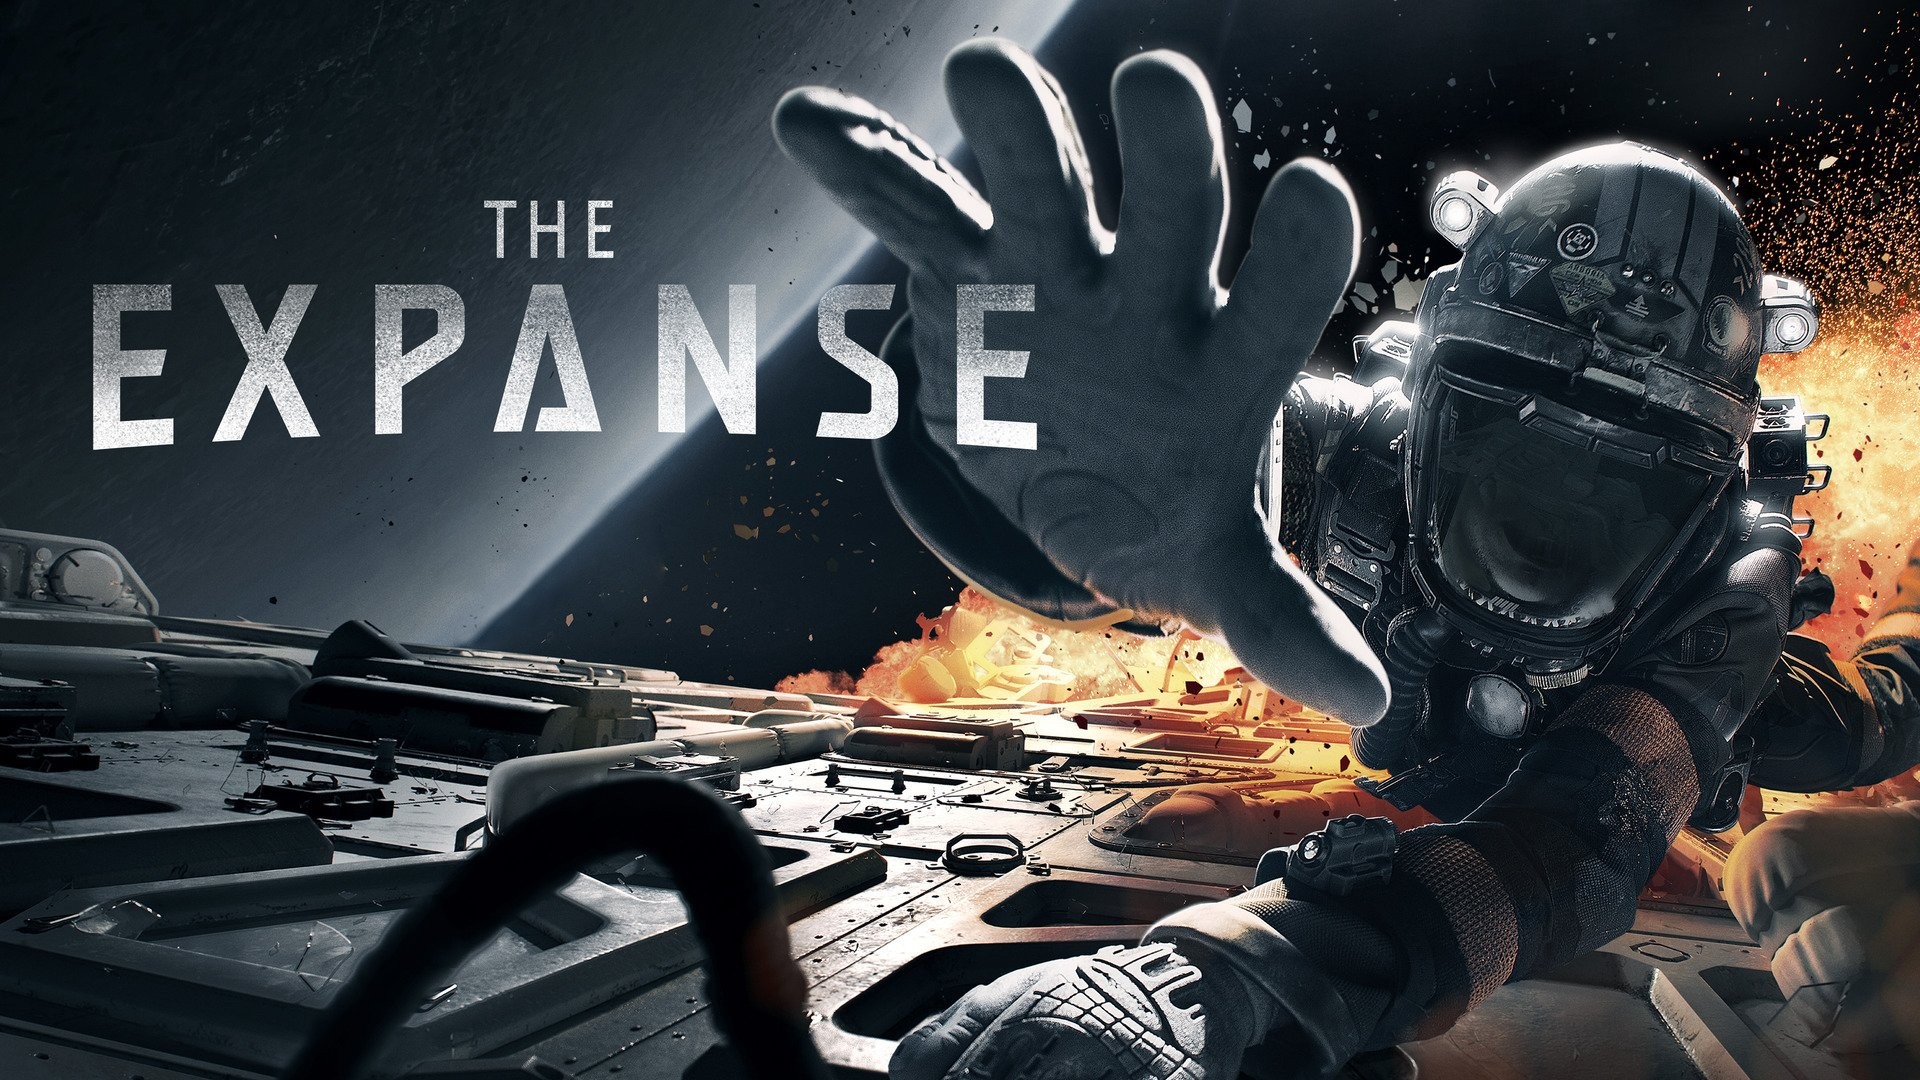 The Expanse Season 2 Review: Syfy's Bold Gamble Continues to Pay